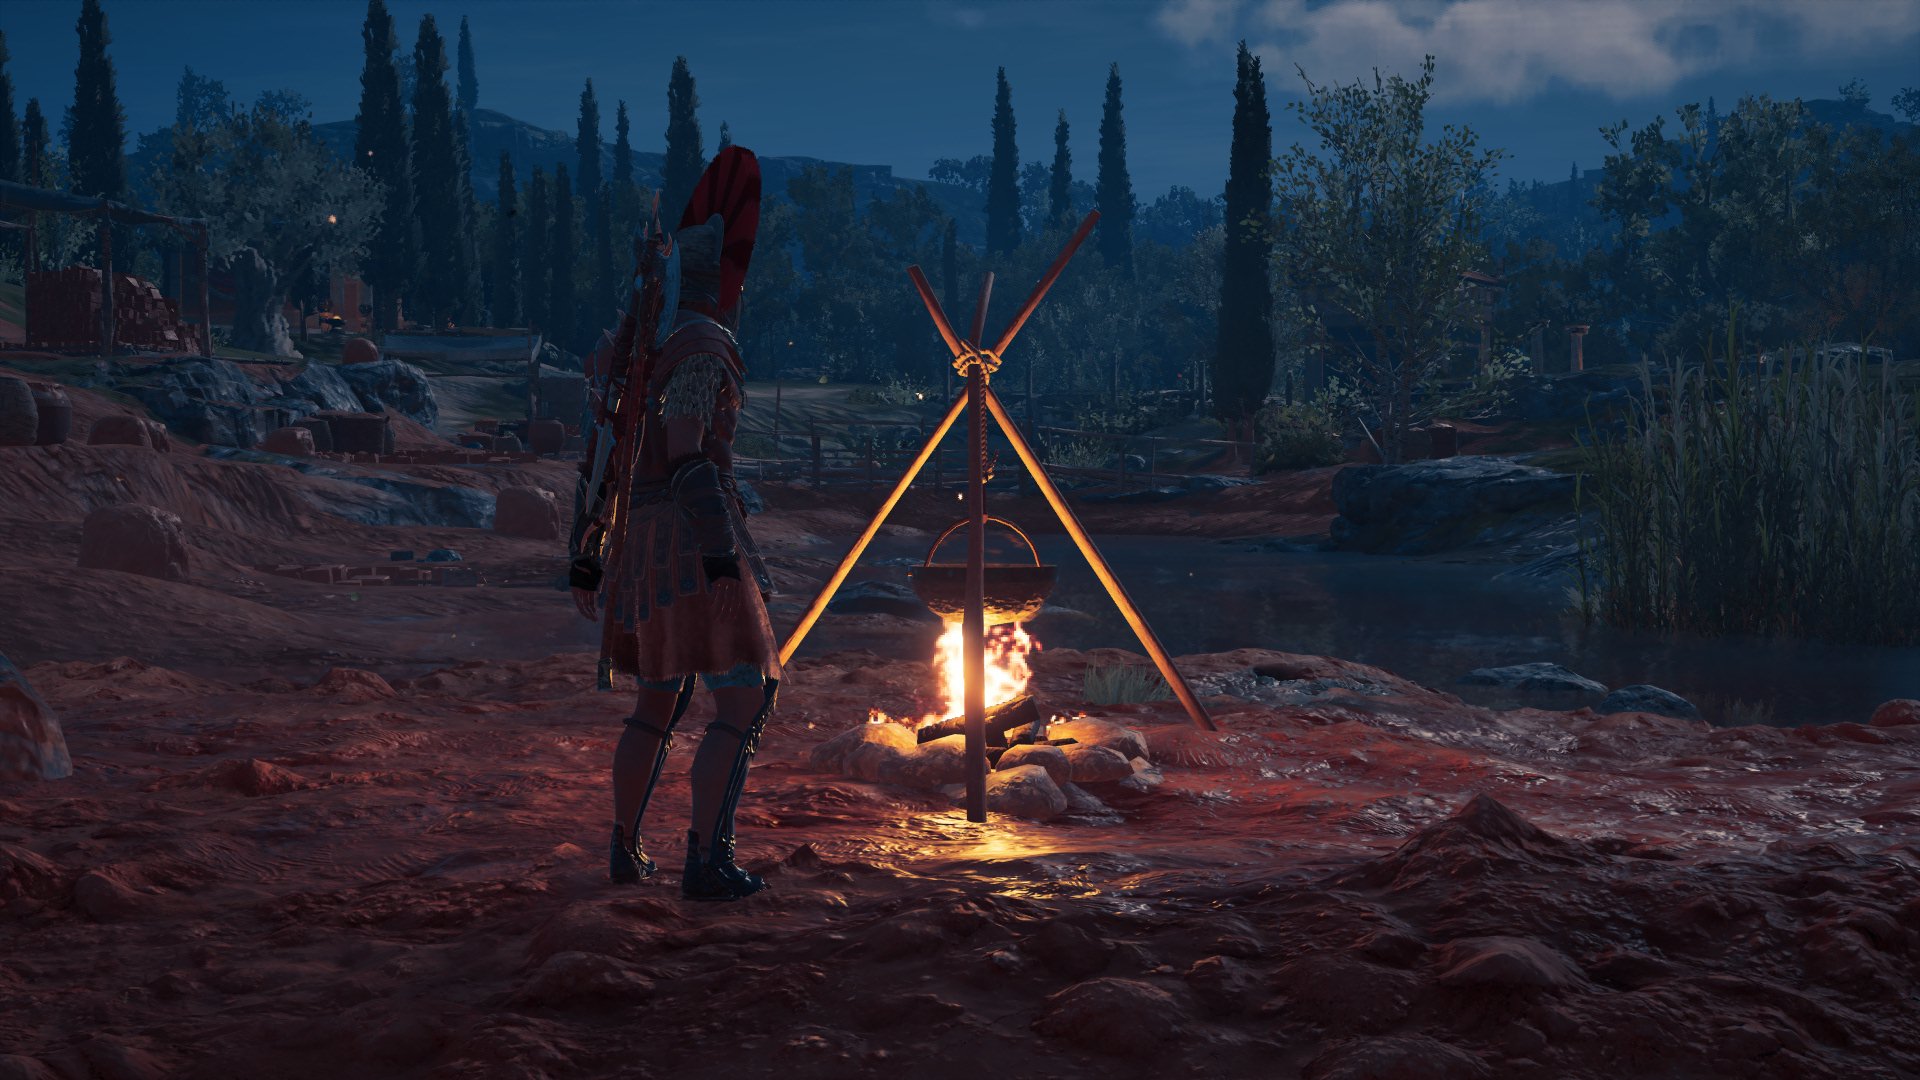 Assassin Creed Odyssey Assassins Creed Video Games PC Gaming Screen Shot 1920x1080